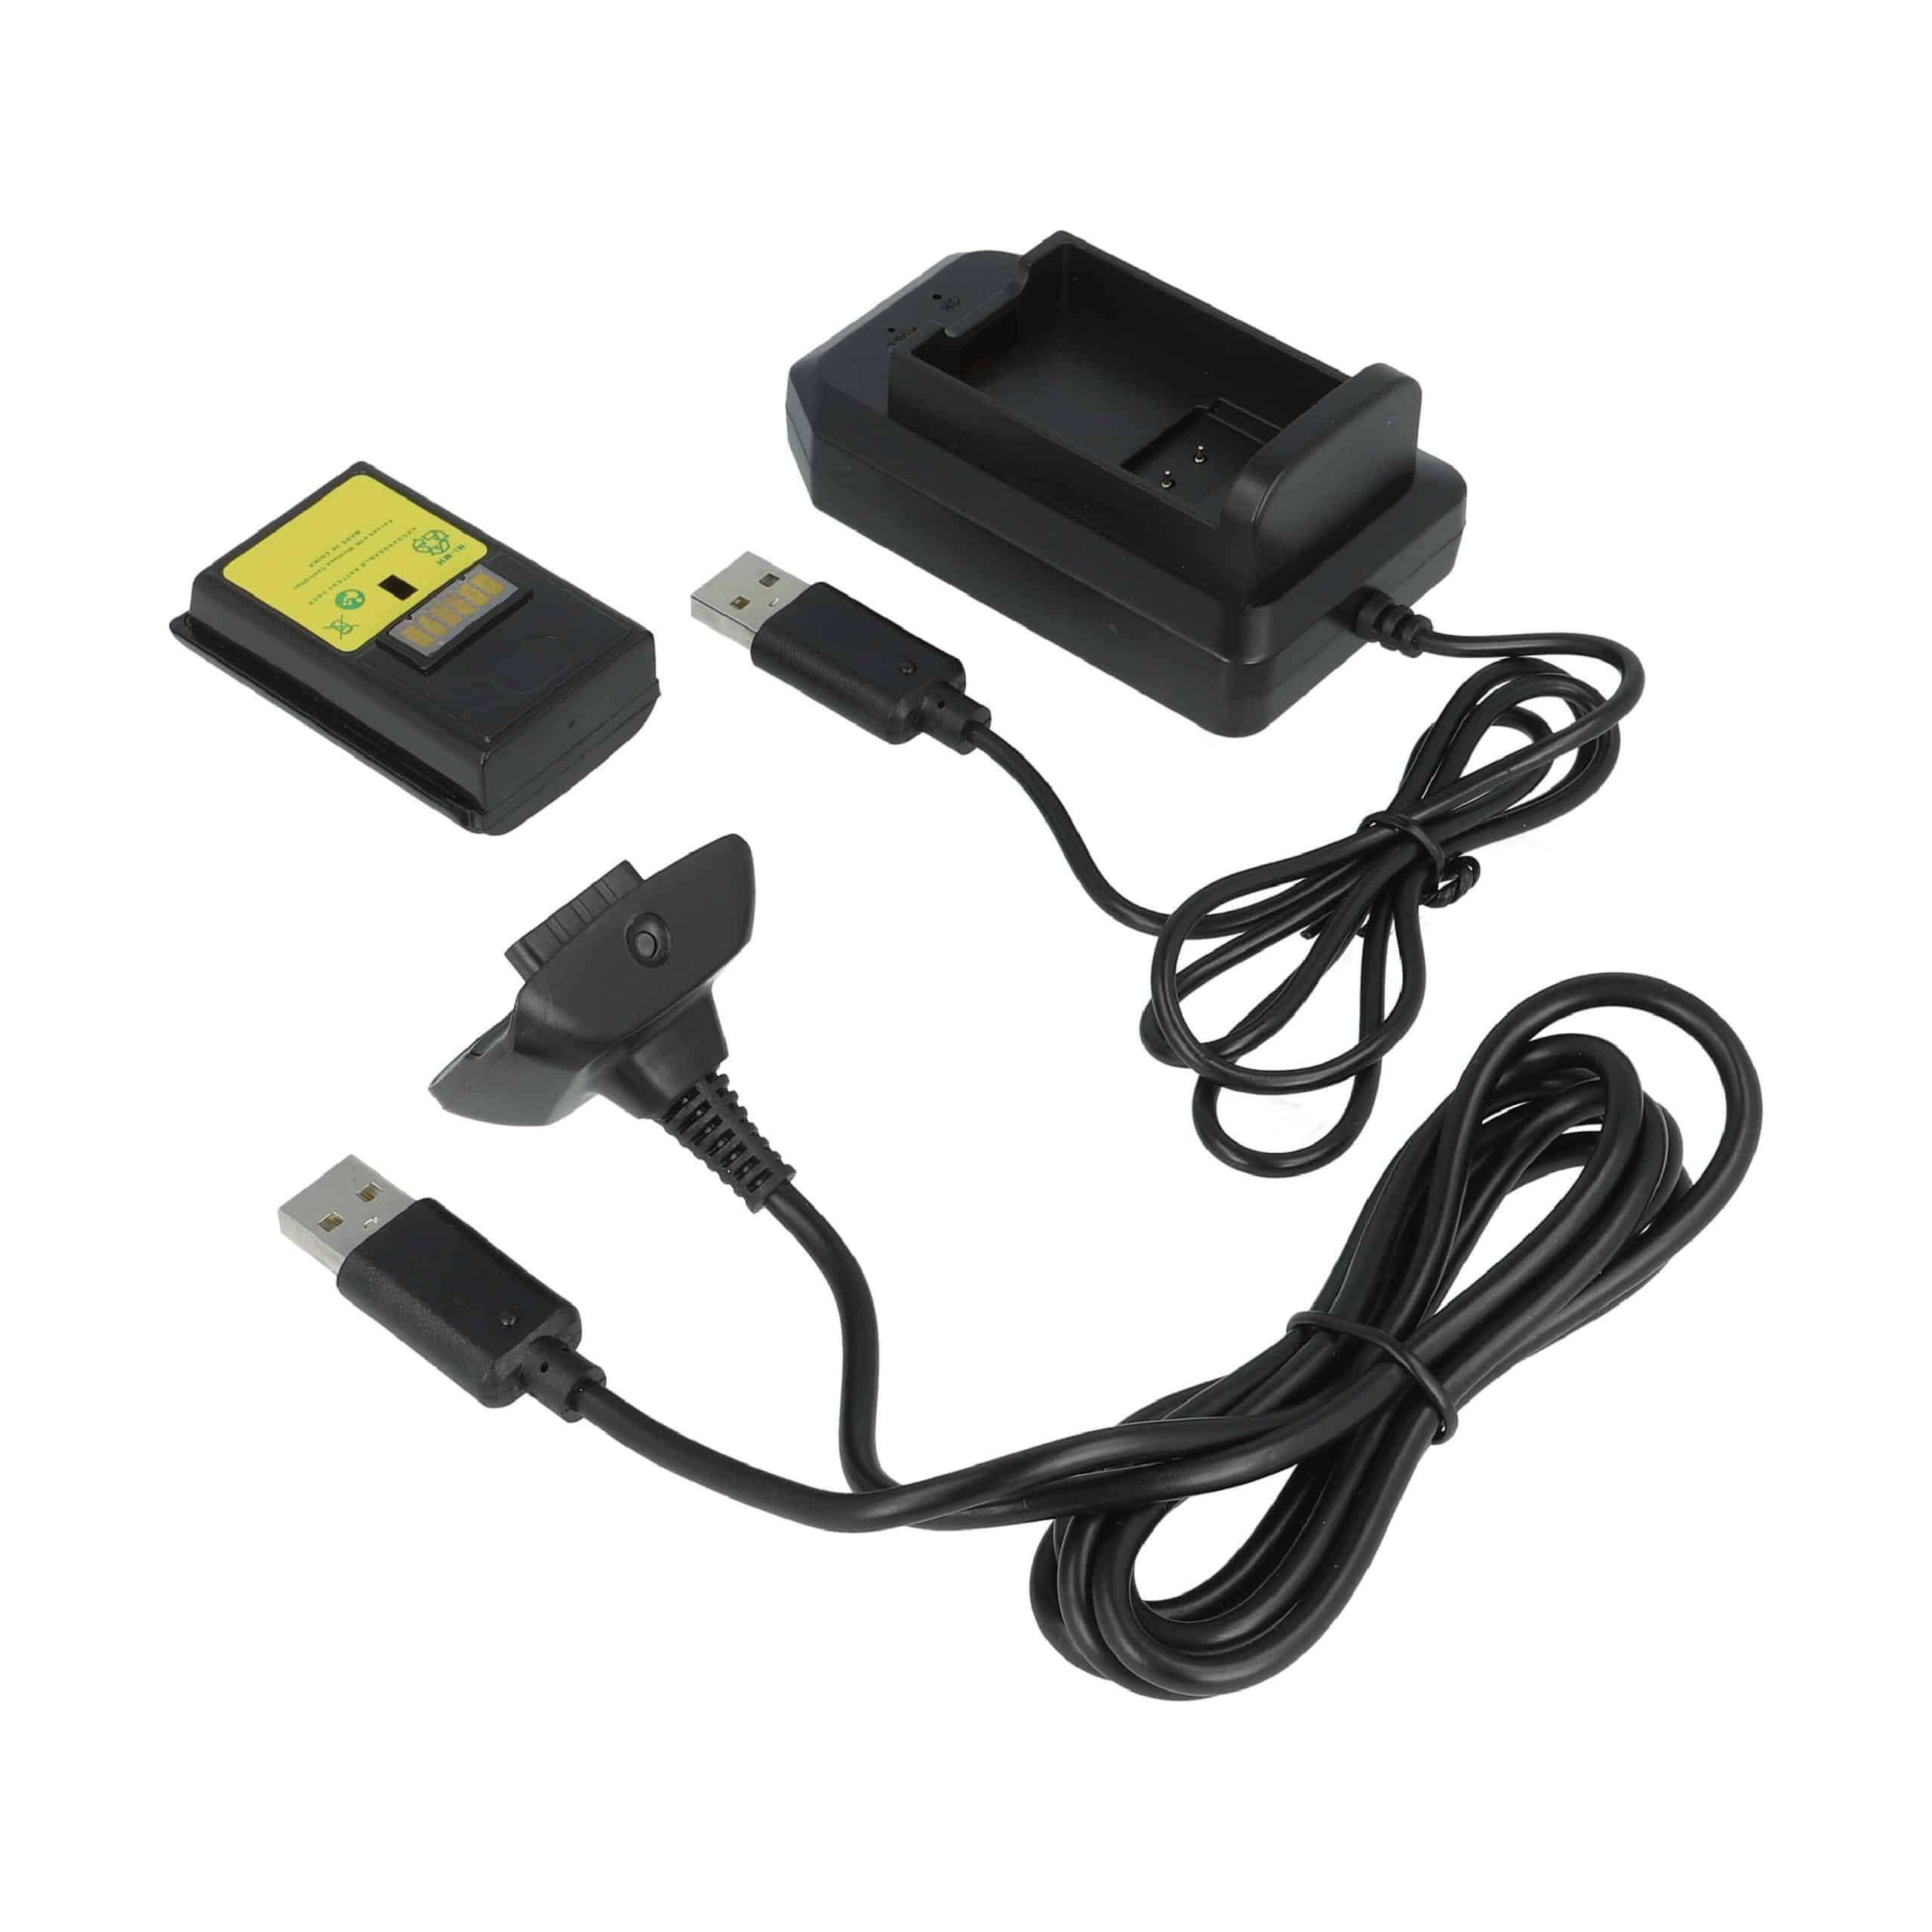 vhbw Play & Charge Kit - 1x charger, 1x charging cable, 1x battery Black